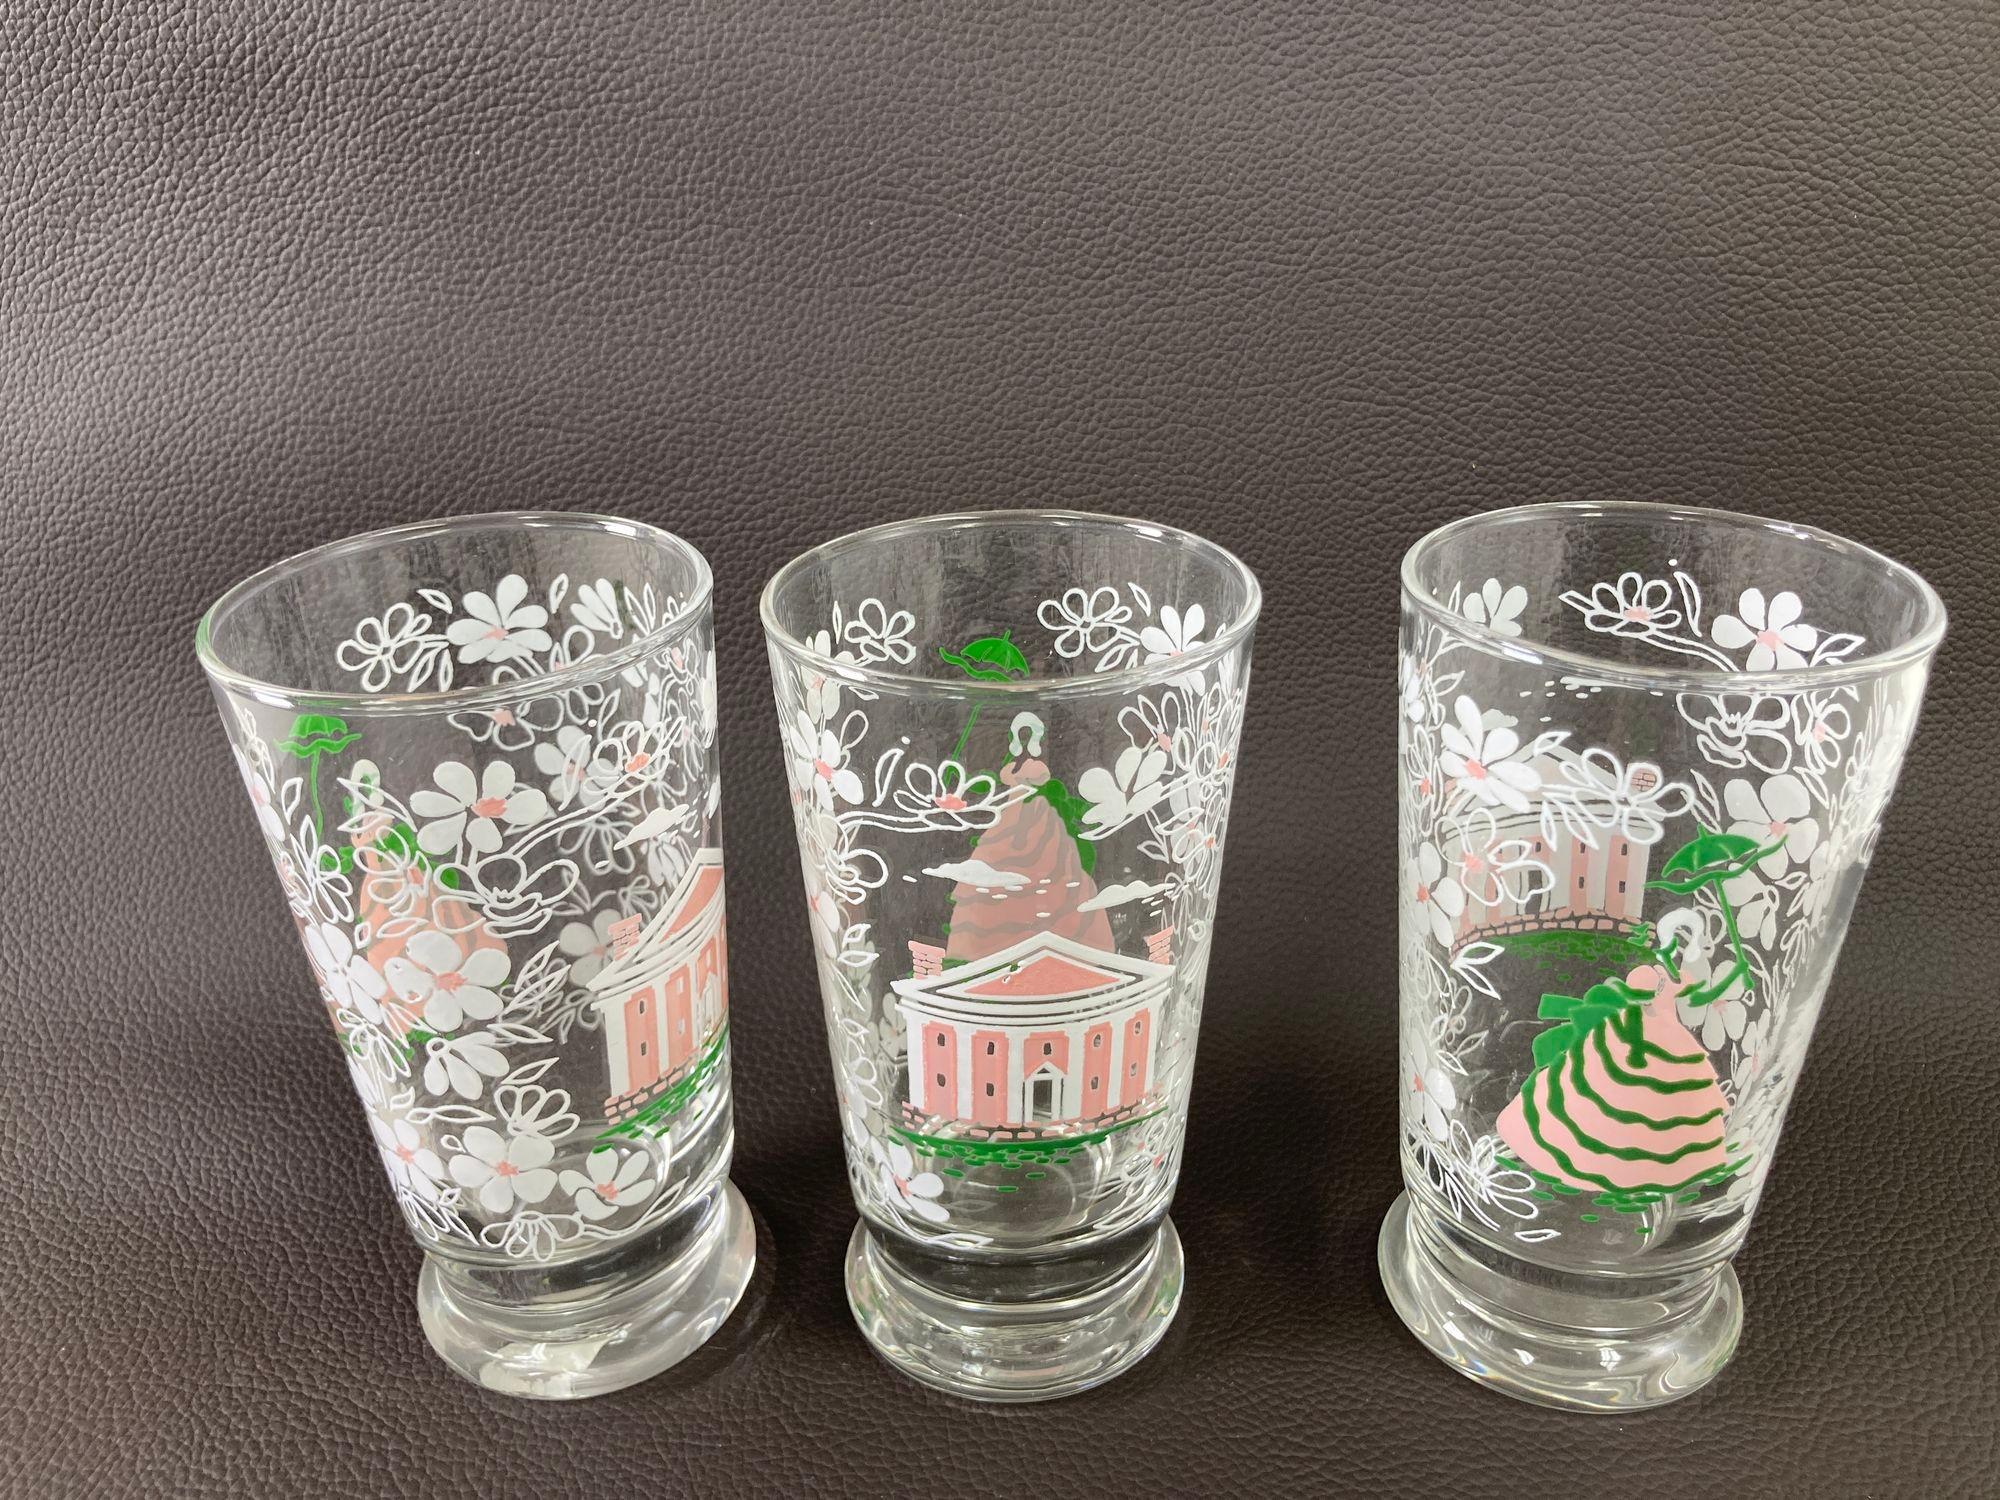 Vintage KENTUCKY DERBY Libbey Americana Southern Belle Magnolia Glasses Barware In Good Condition For Sale In North Hollywood, CA